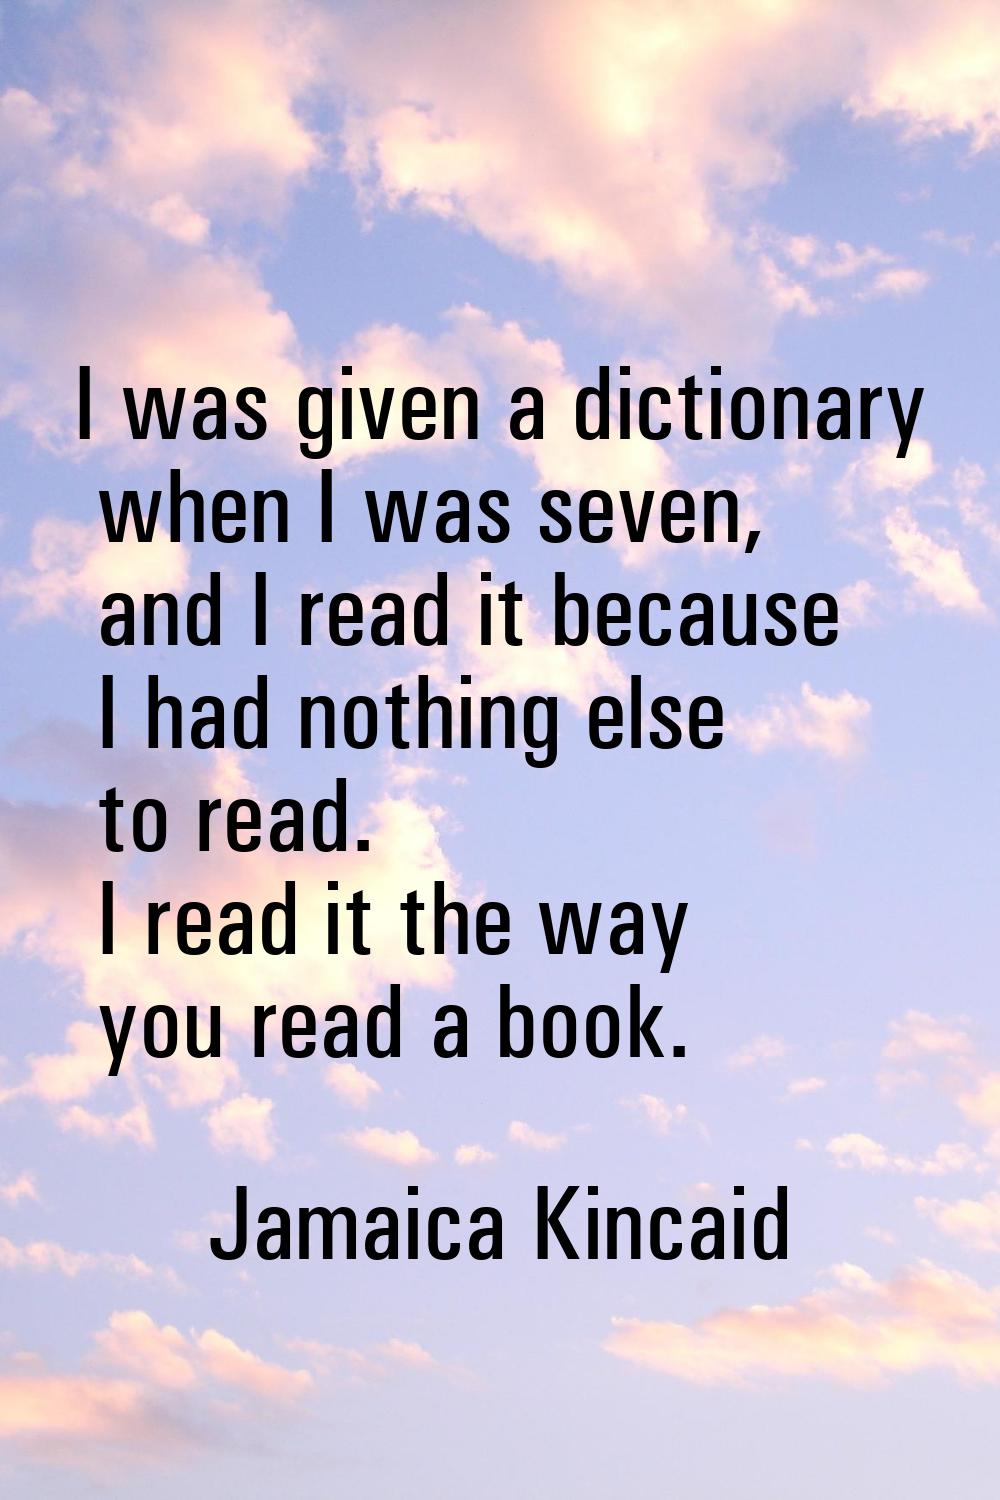 I was given a dictionary when I was seven, and I read it because I had nothing else to read. I read